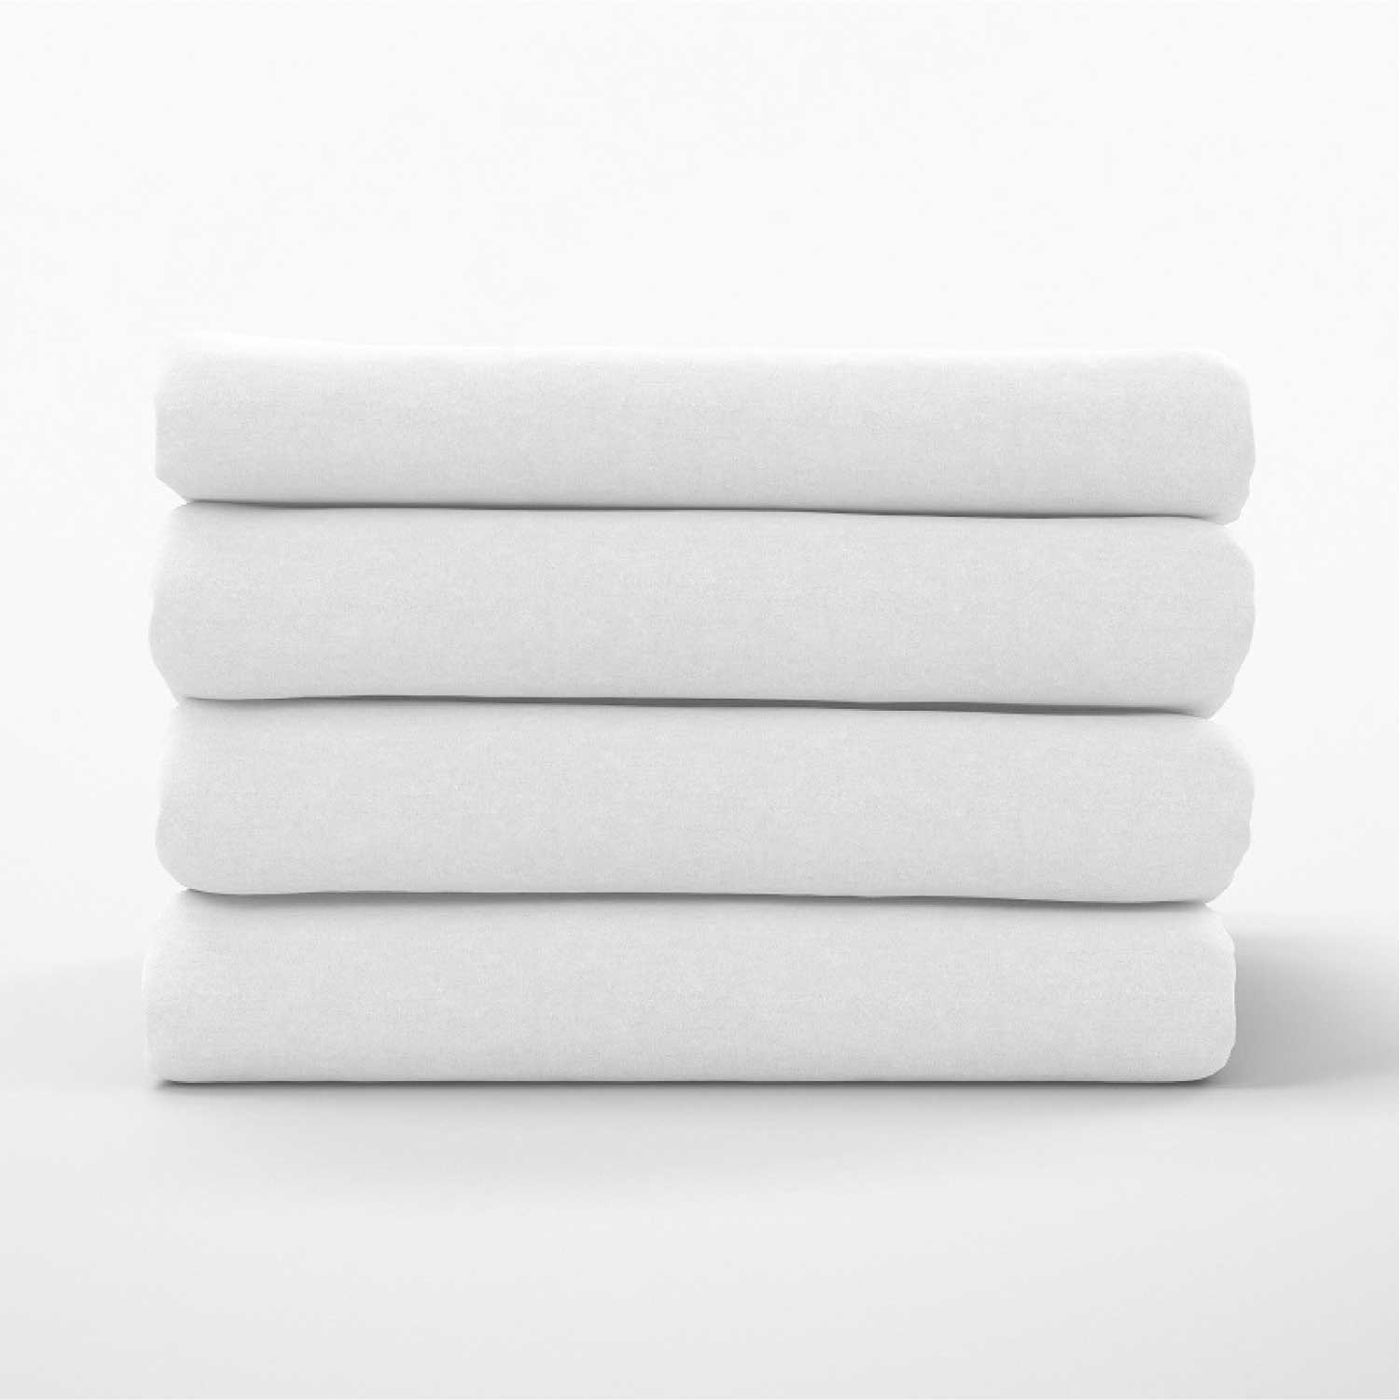 300 TC Egyptian Cotton Fitted Bed Sheet Set - White